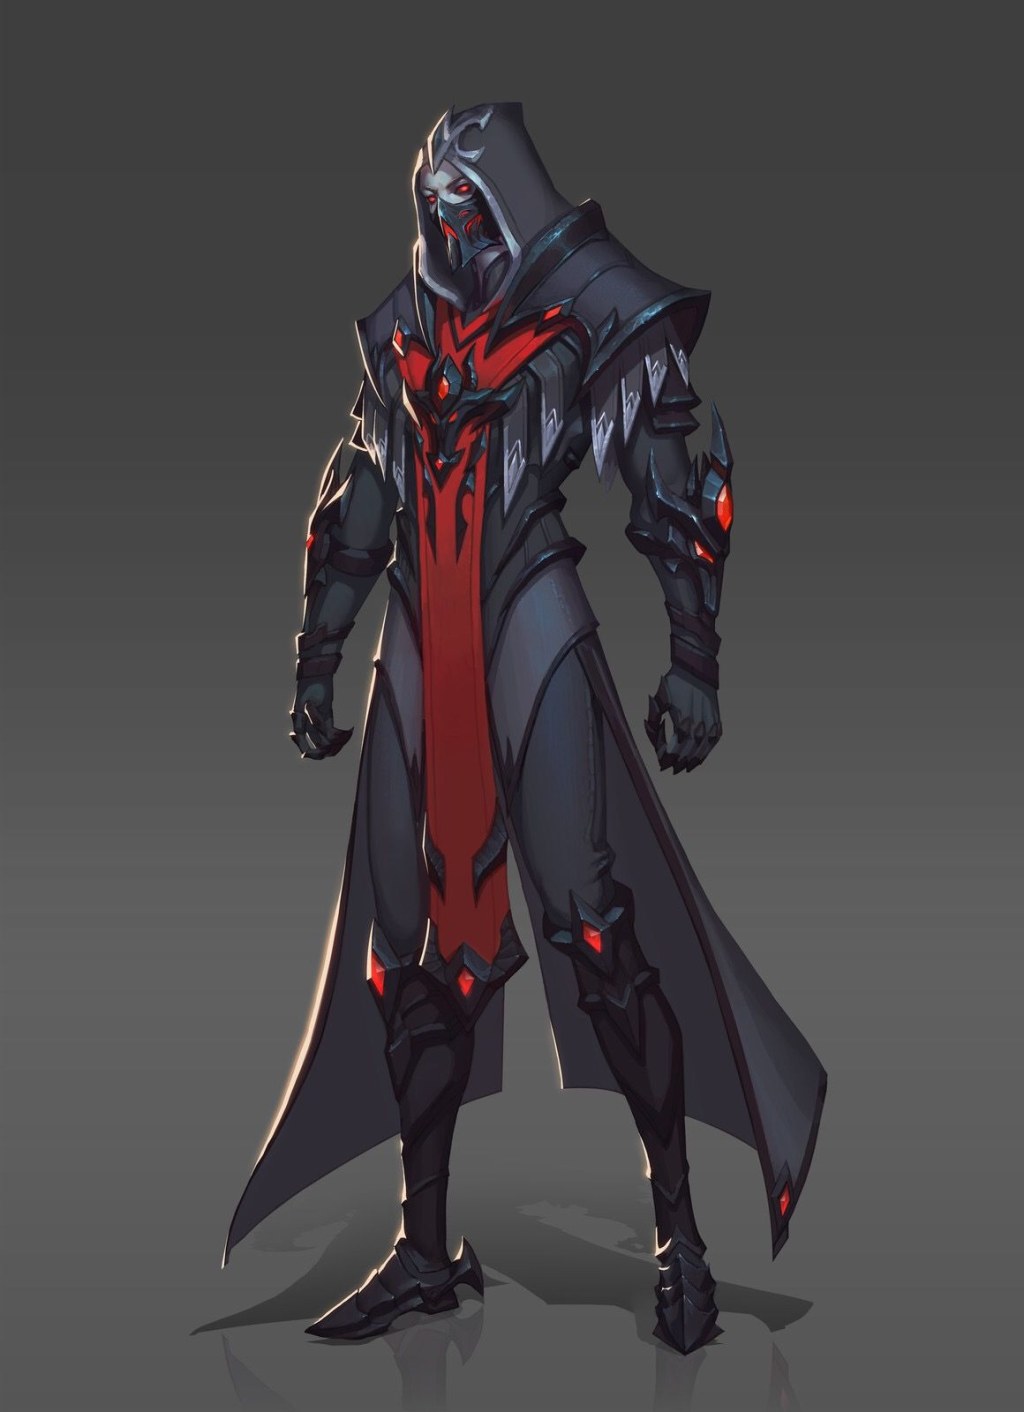 sith concept art - Sith concepts ideas  sith, star wars sith, star wars rpg